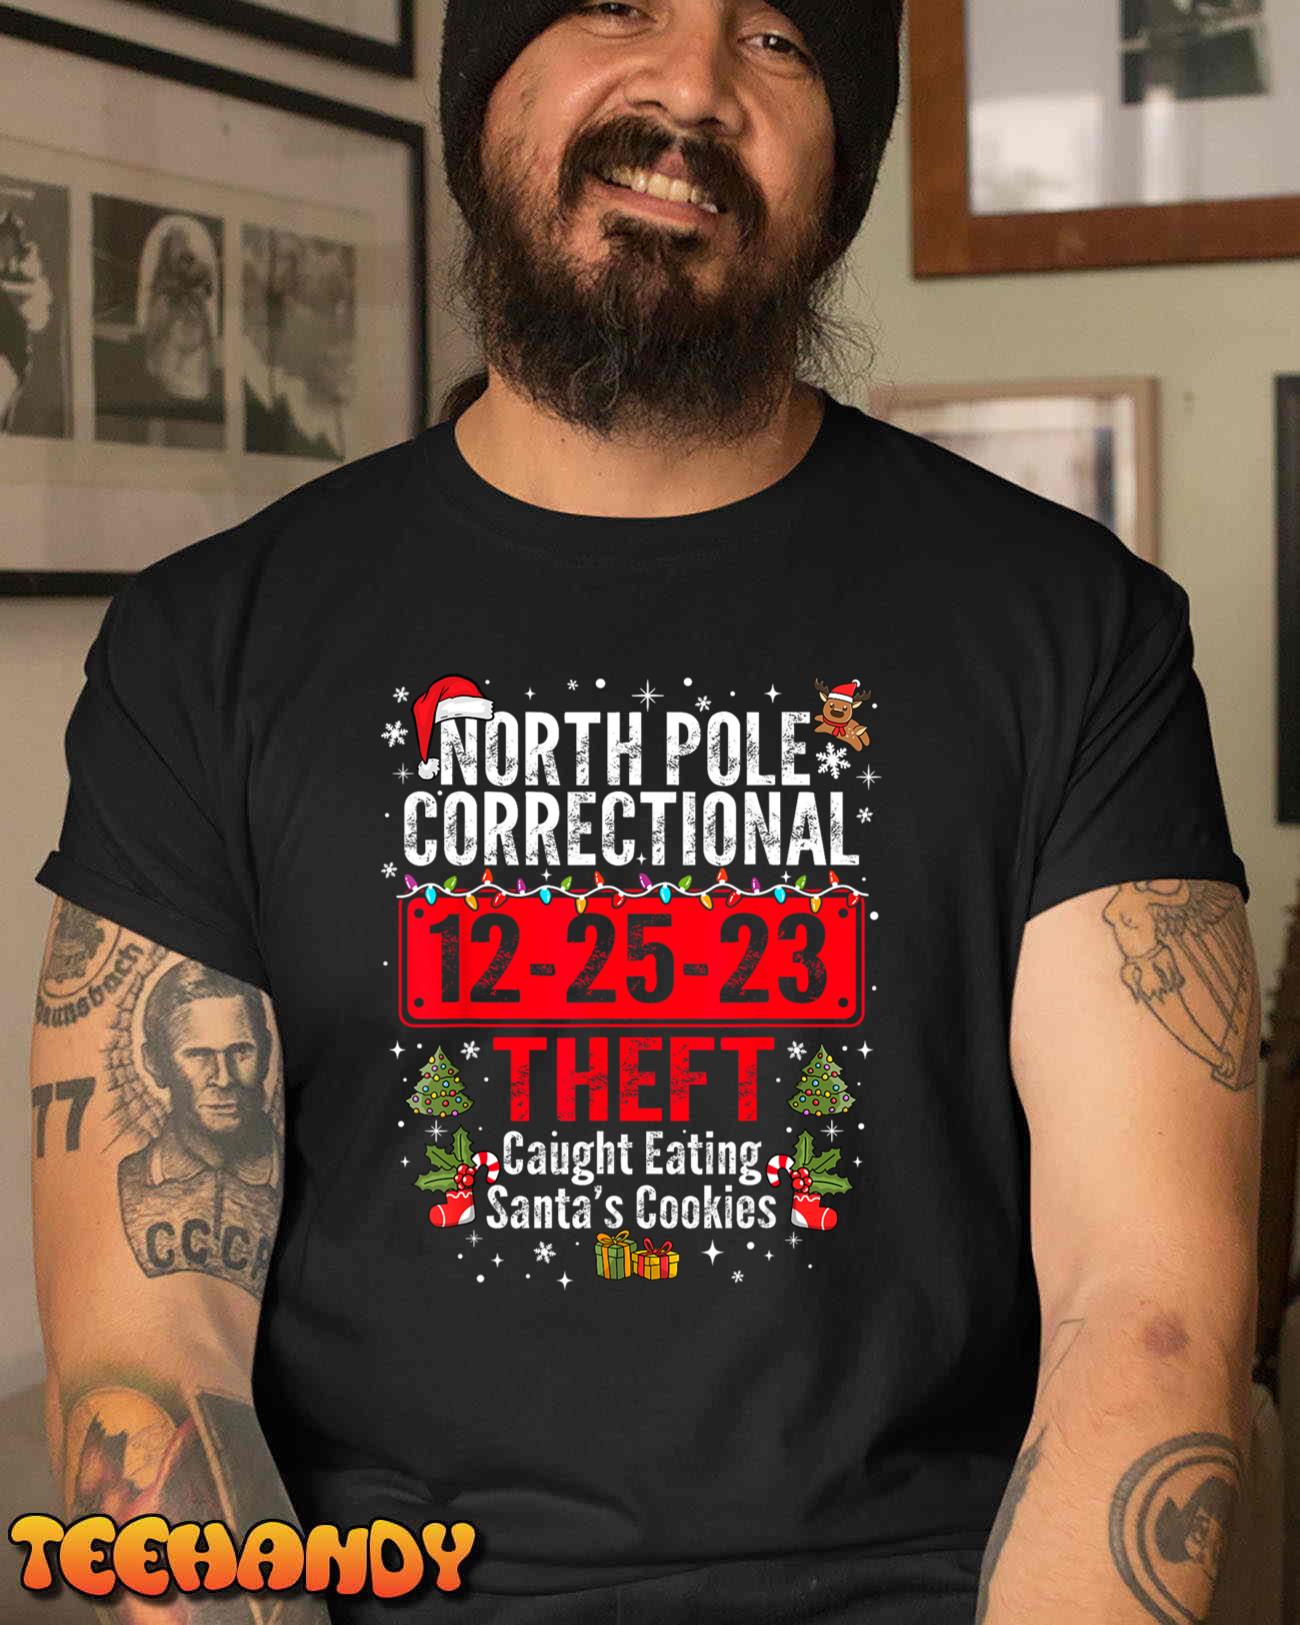 North Pole Correctional Theft Caught Eating Santa’s Cookies T-Shirt